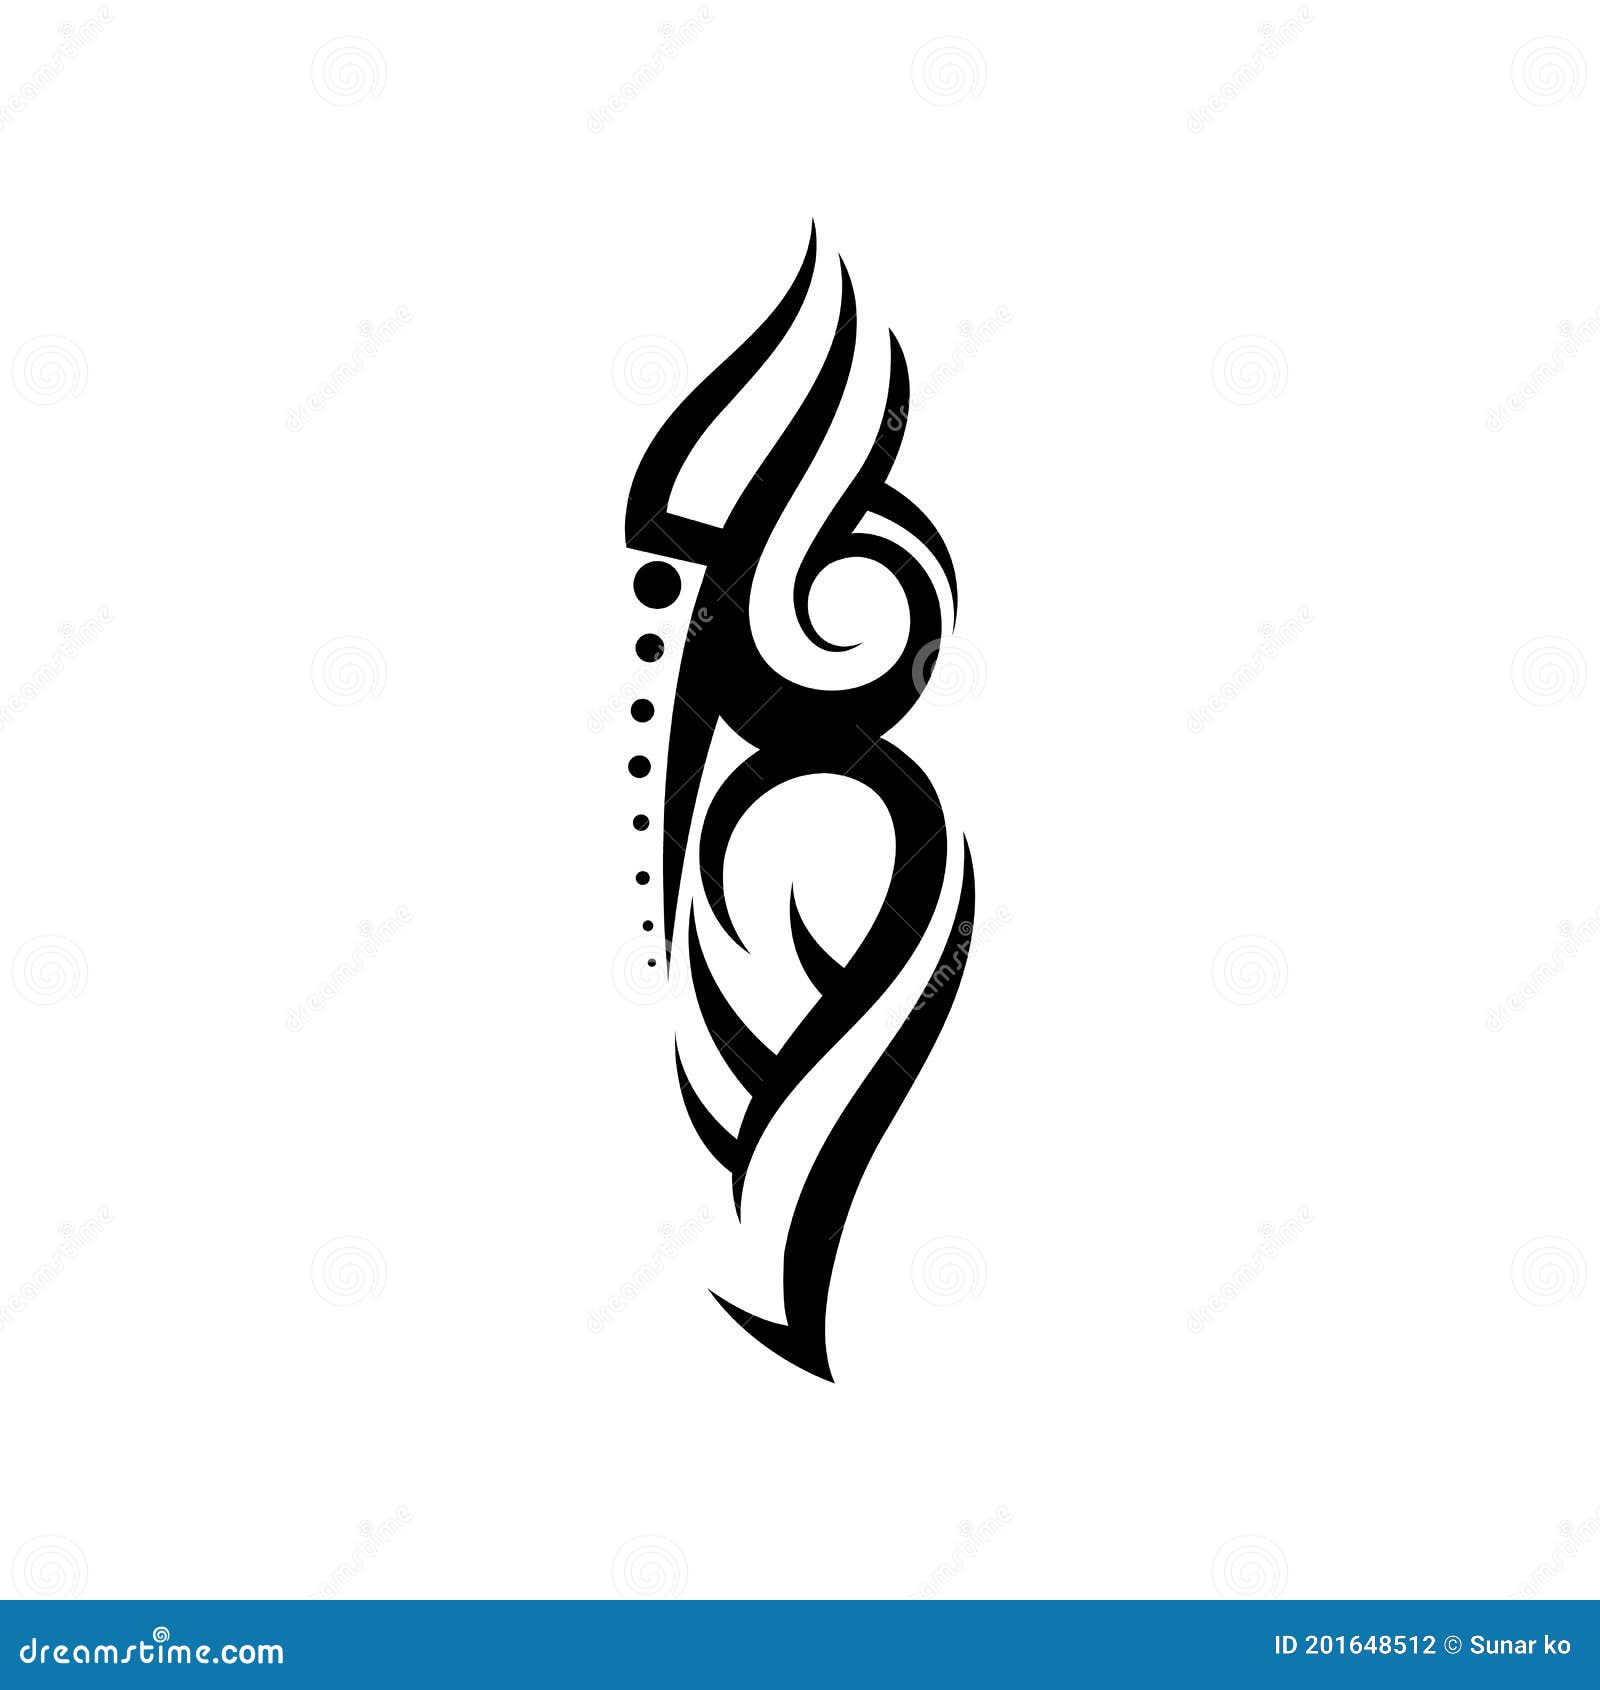 Tribal tattoo Cut Out Stock Images & Pictures - Alamy